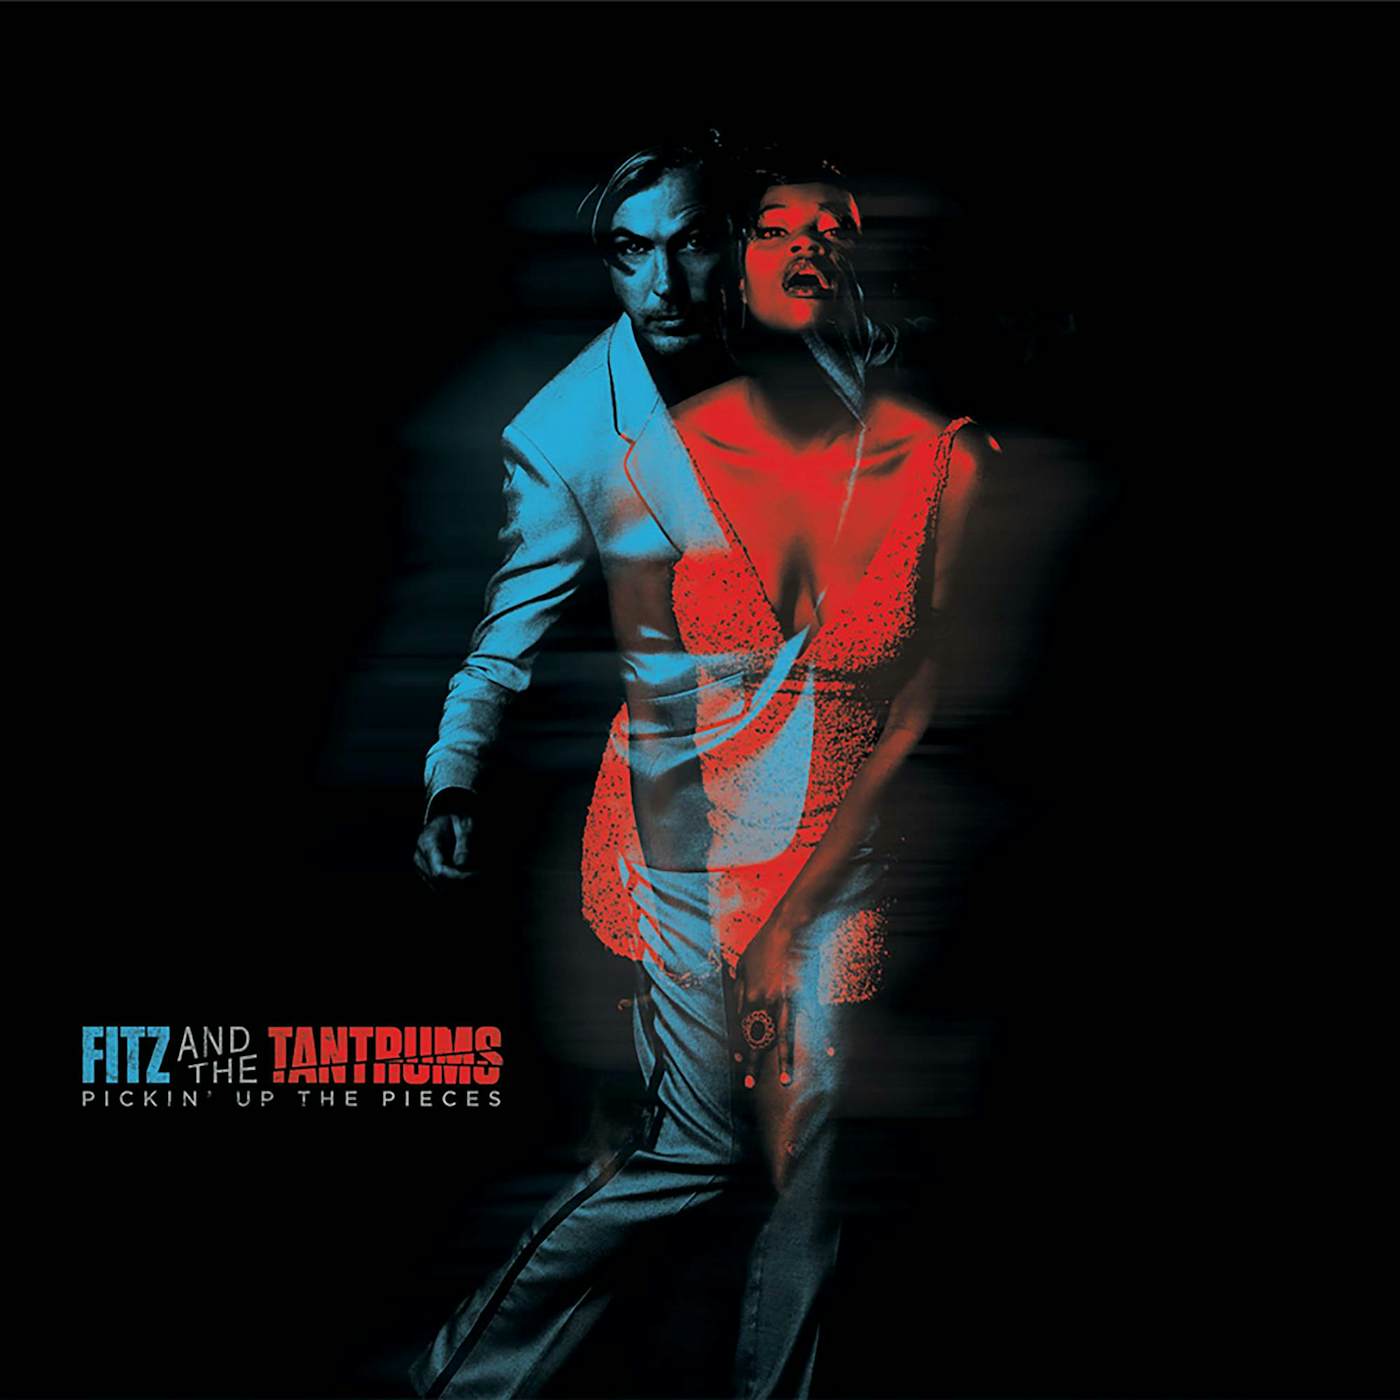 Fitz and The Tantrums PICKIN’ UP THE PIECES (PINK VINYL) (TEN BANDS ONE CAUSE) Vinyl Record